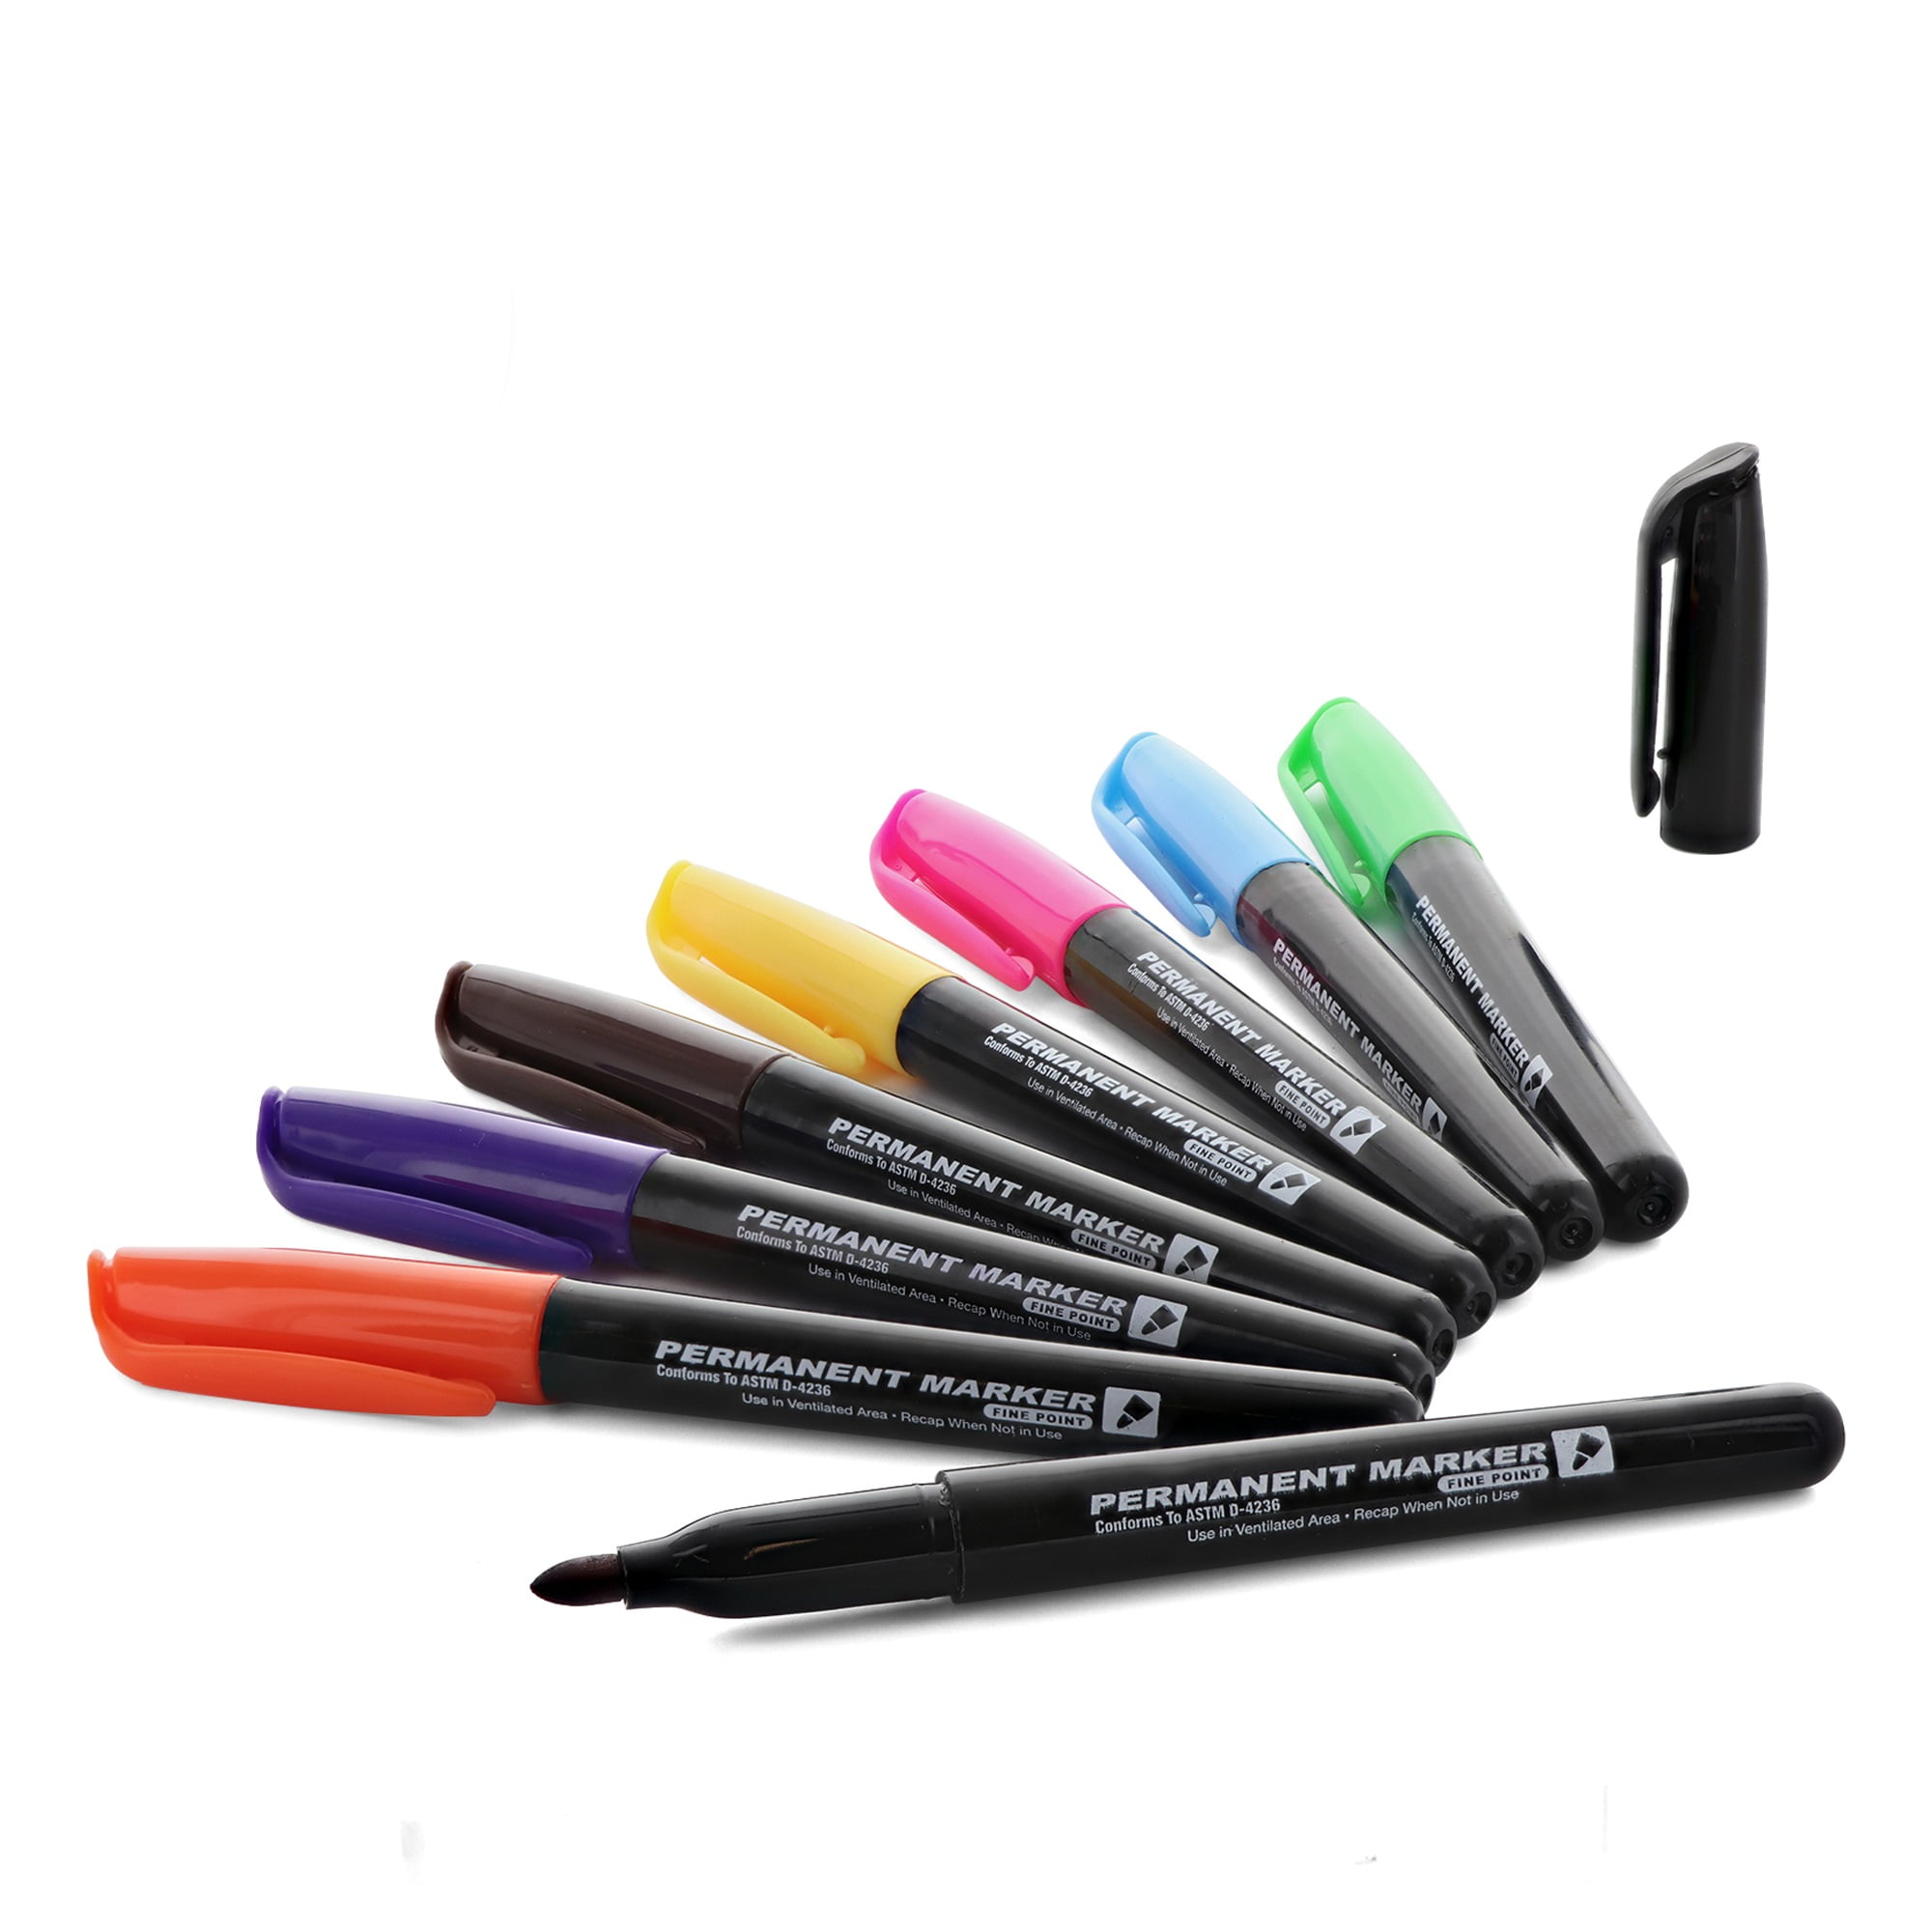 Wet Erase Markers, Shuttle Art 15 Colors 1mm Fine Tip Smudge-Free Markers,  Use on Laminated Calendars,Overhead  Projectors,Schedules,Whiteboards,Transparencies,Glass 